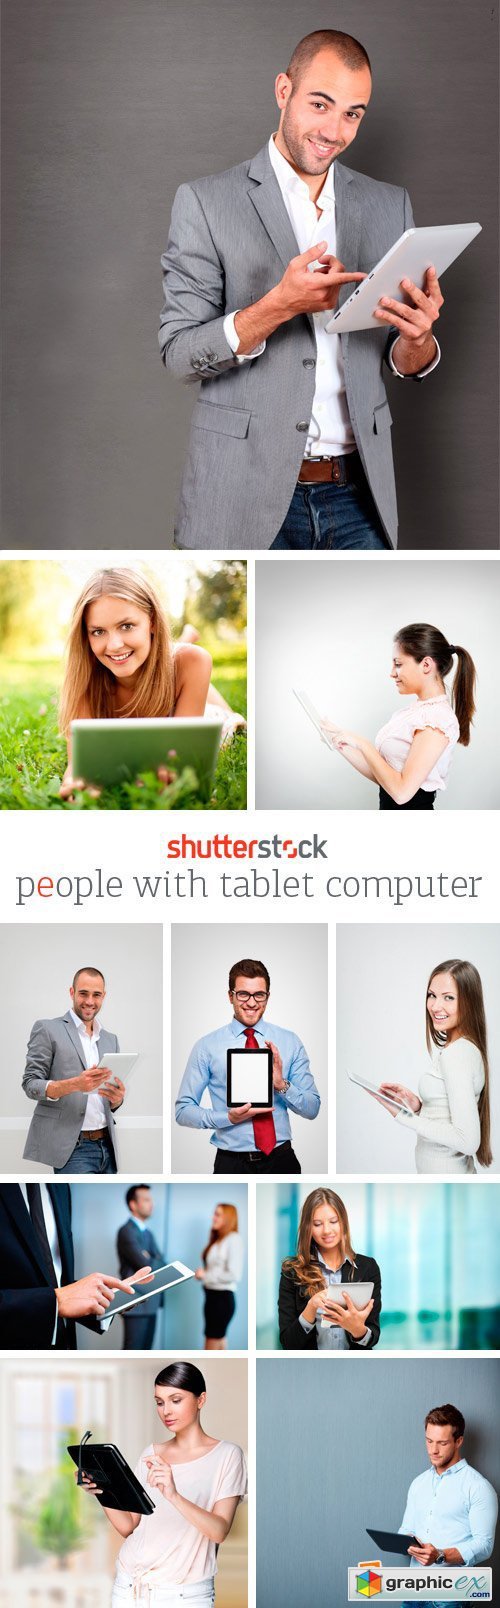 Amazing SS - People with Tablet Computer, 25xJPGs